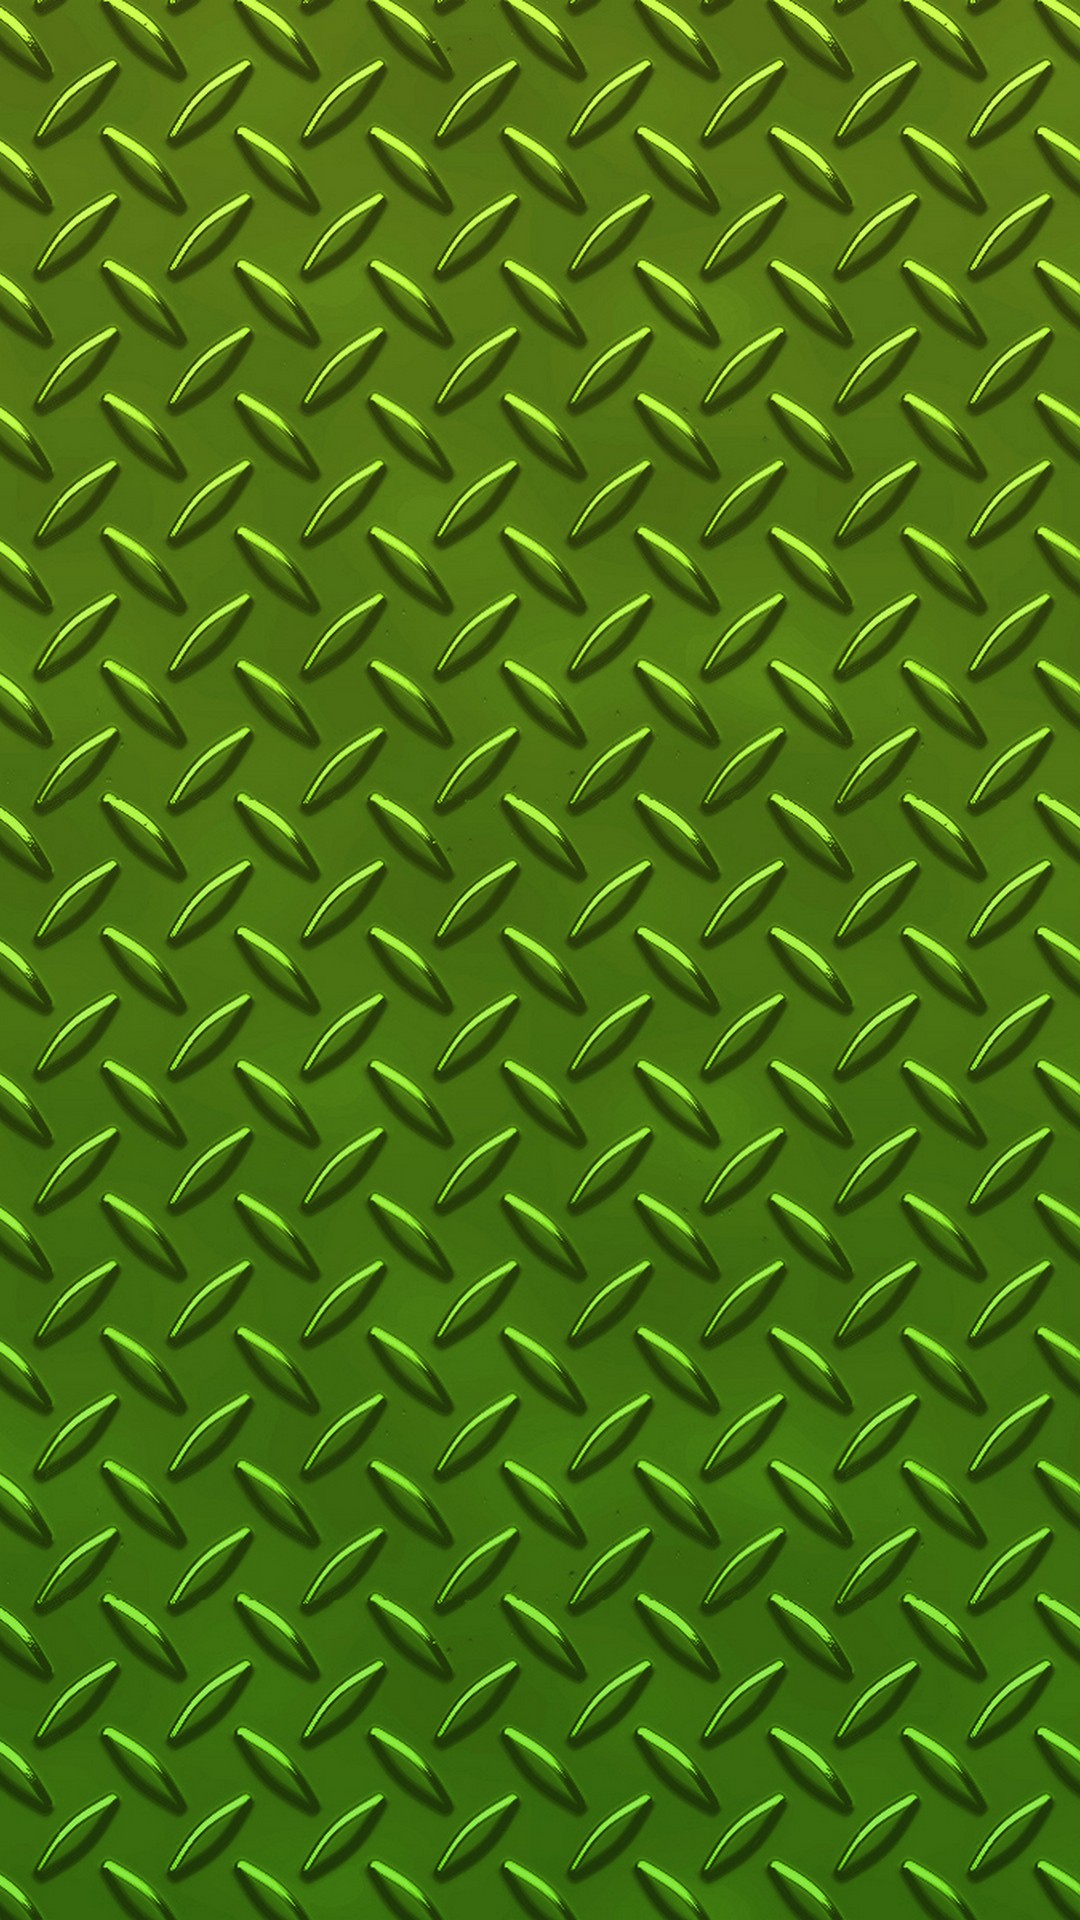 Dark Green Wallpaper For iPhone with image resolution 1080x1920 pixel. You can make this wallpaper for your iPhone 5, 6, 7, 8, X backgrounds, Mobile Screensaver, or iPad Lock Screen